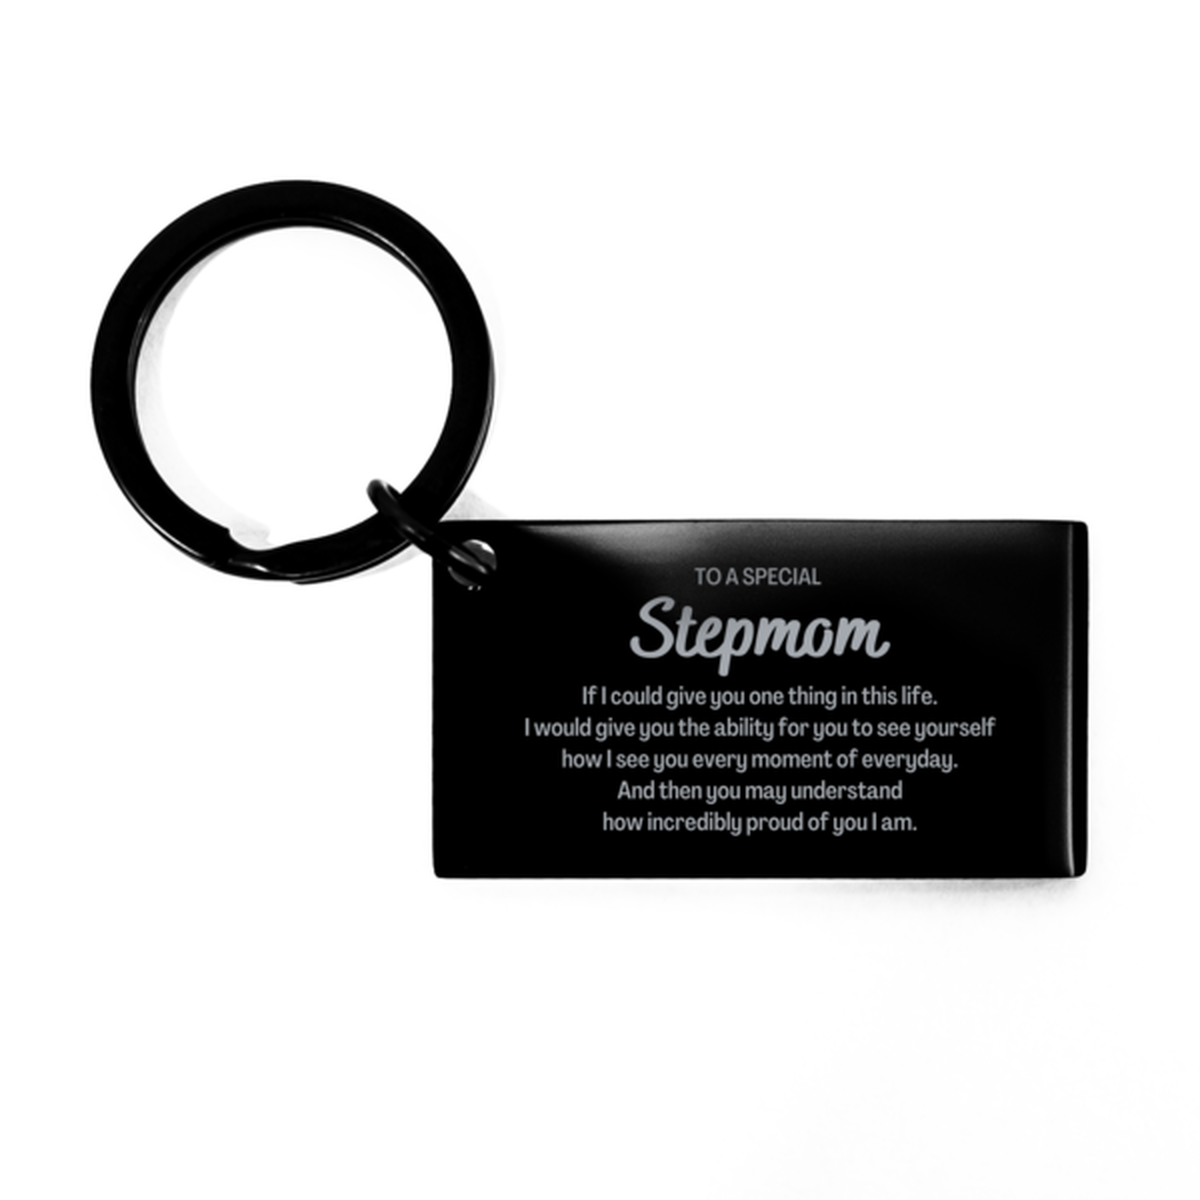 To My Stepmom Keychain, Gifts For Stepmom Engraved, Inspirational Gifts for Christmas Birthday, Epic Gifts for Stepmom To A Special Stepmom how incredibly proud of you I am